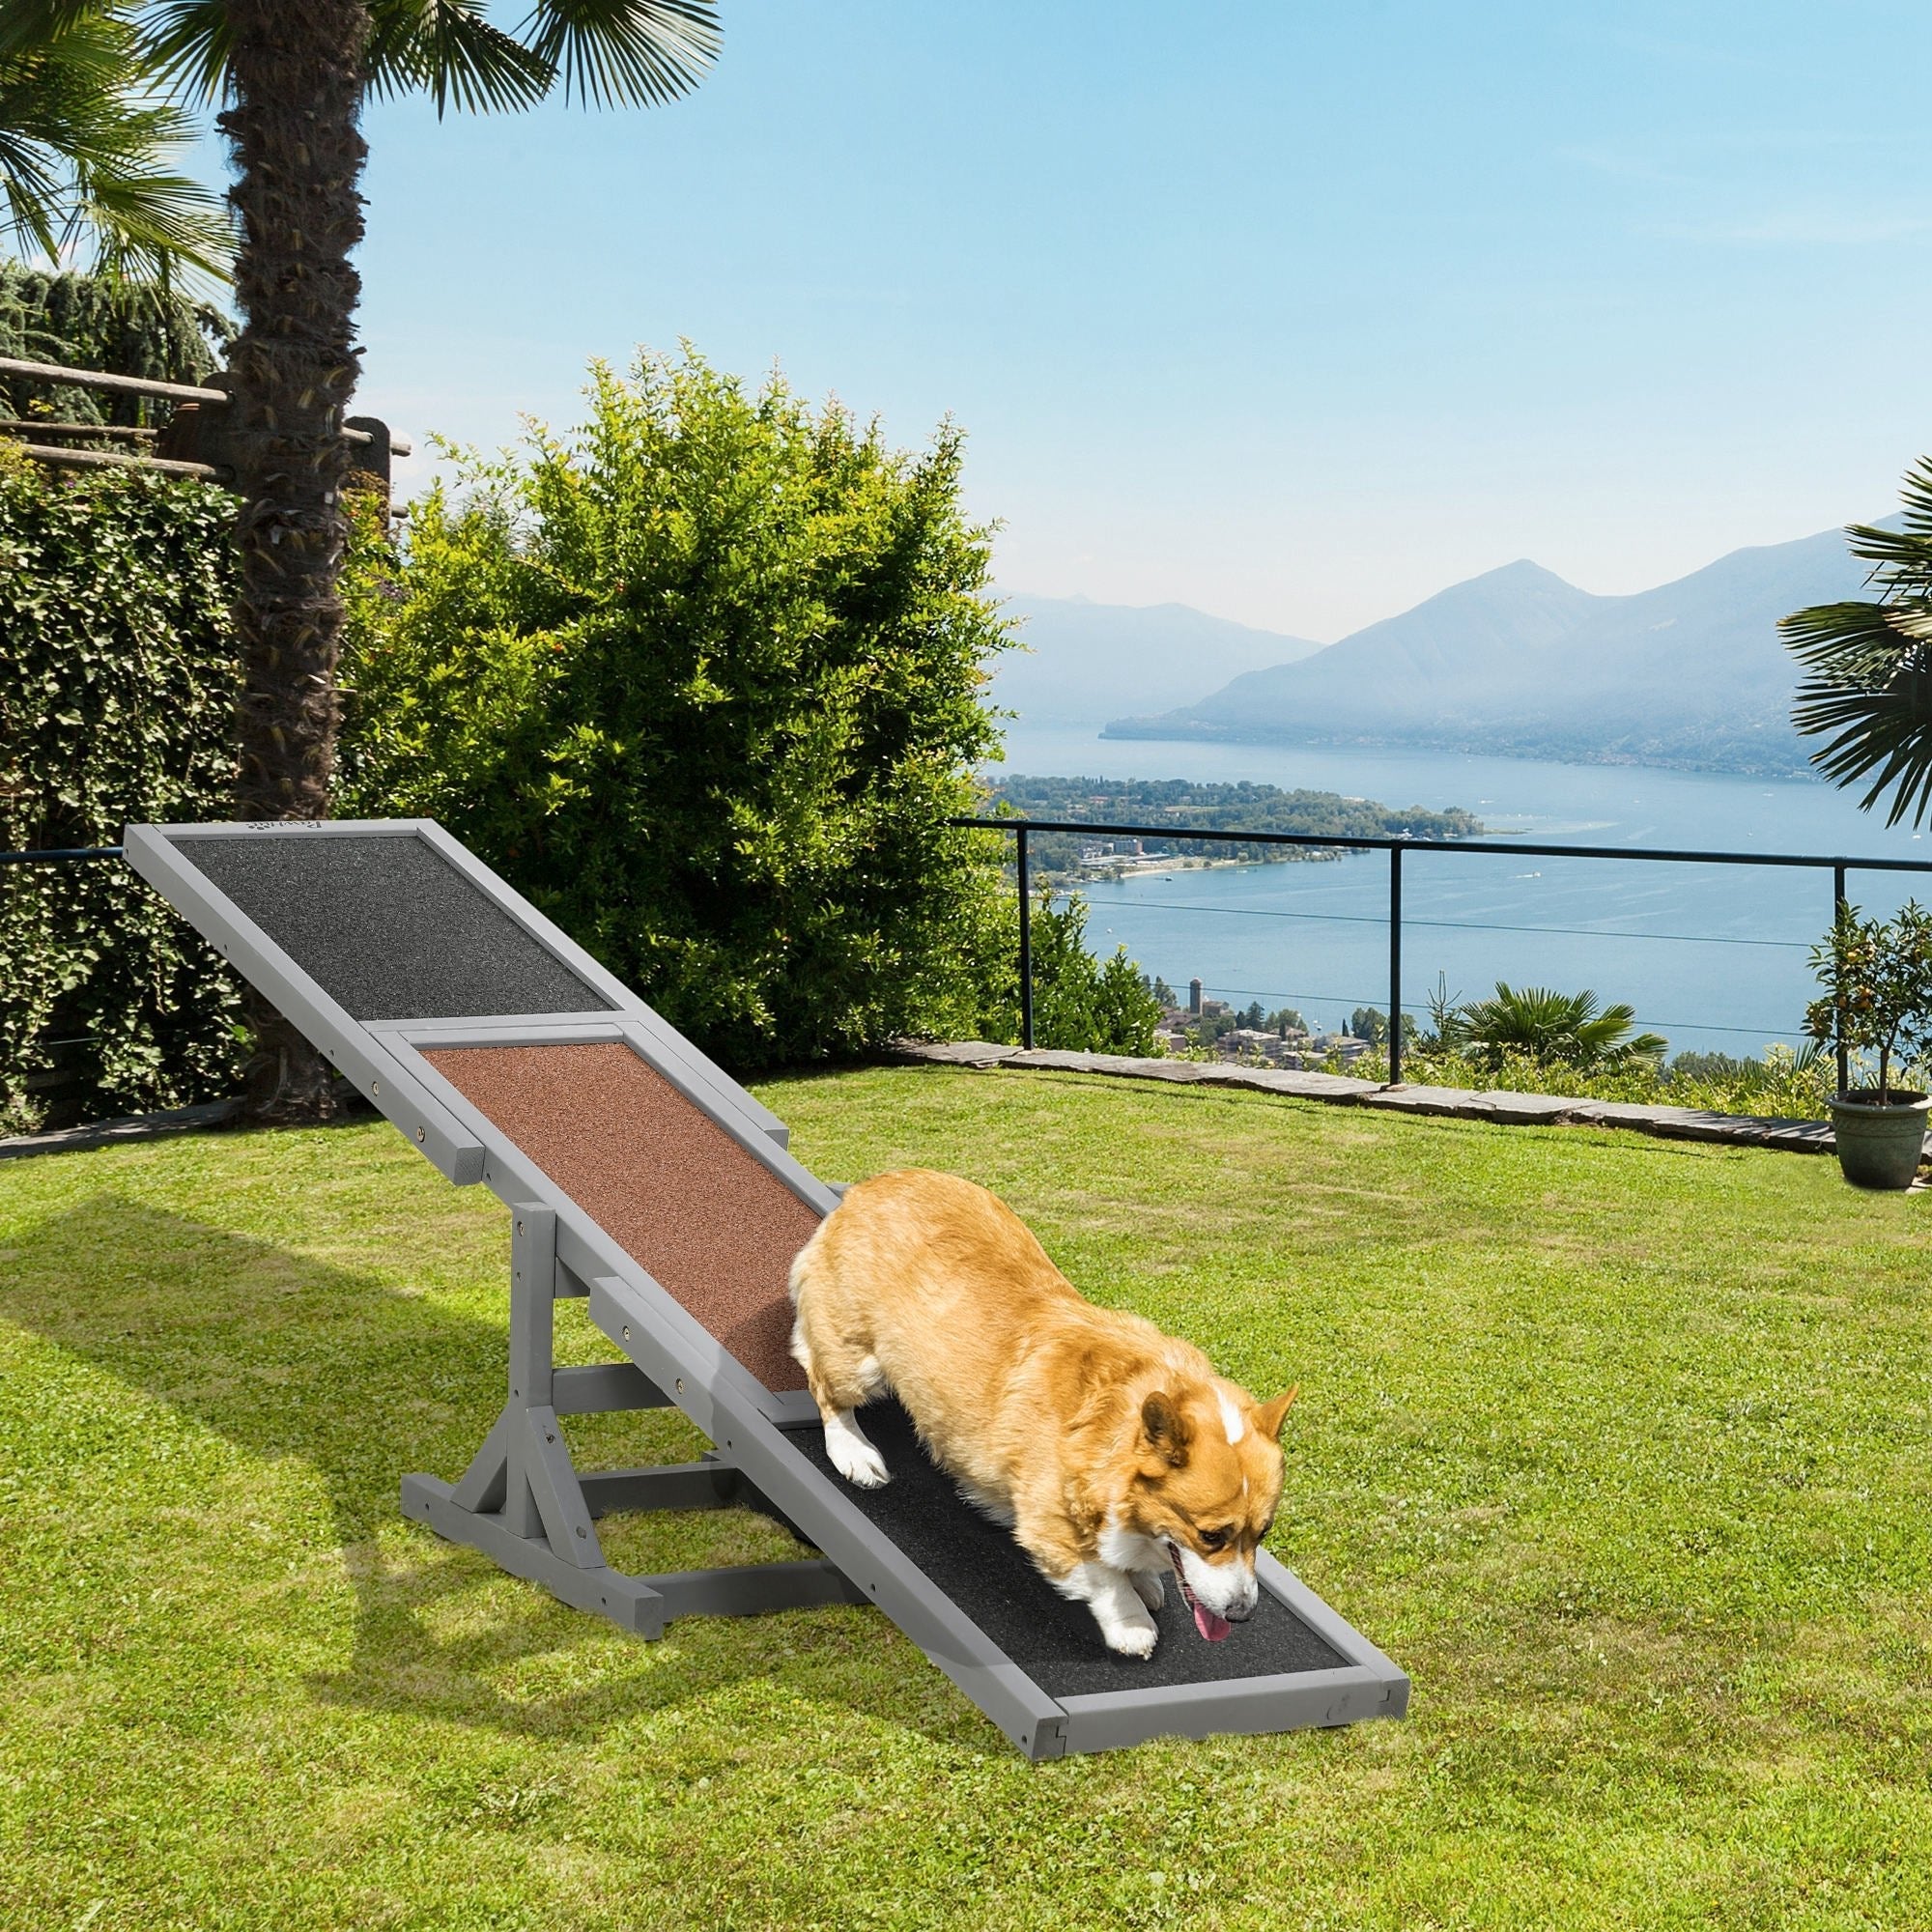 Wooden Pet Seesaw for Big Dogs, Dog Agility Equipment with Anti-Slip Surface - Grey, PawHut,